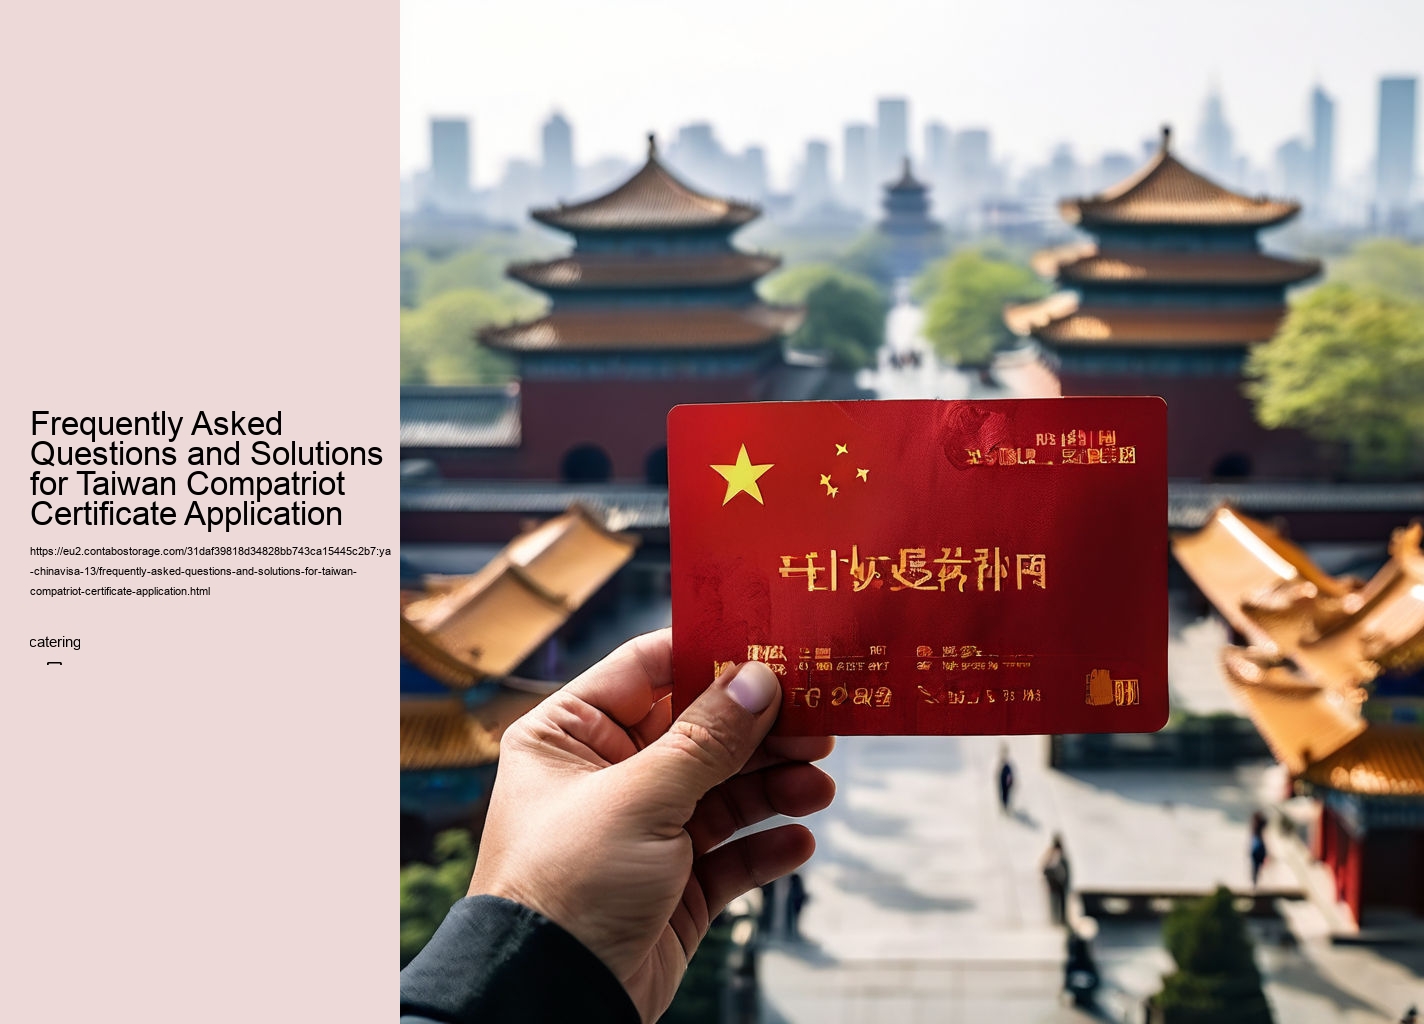 Frequently Asked Questions and Solutions for Taiwan Compatriot Certificate Application